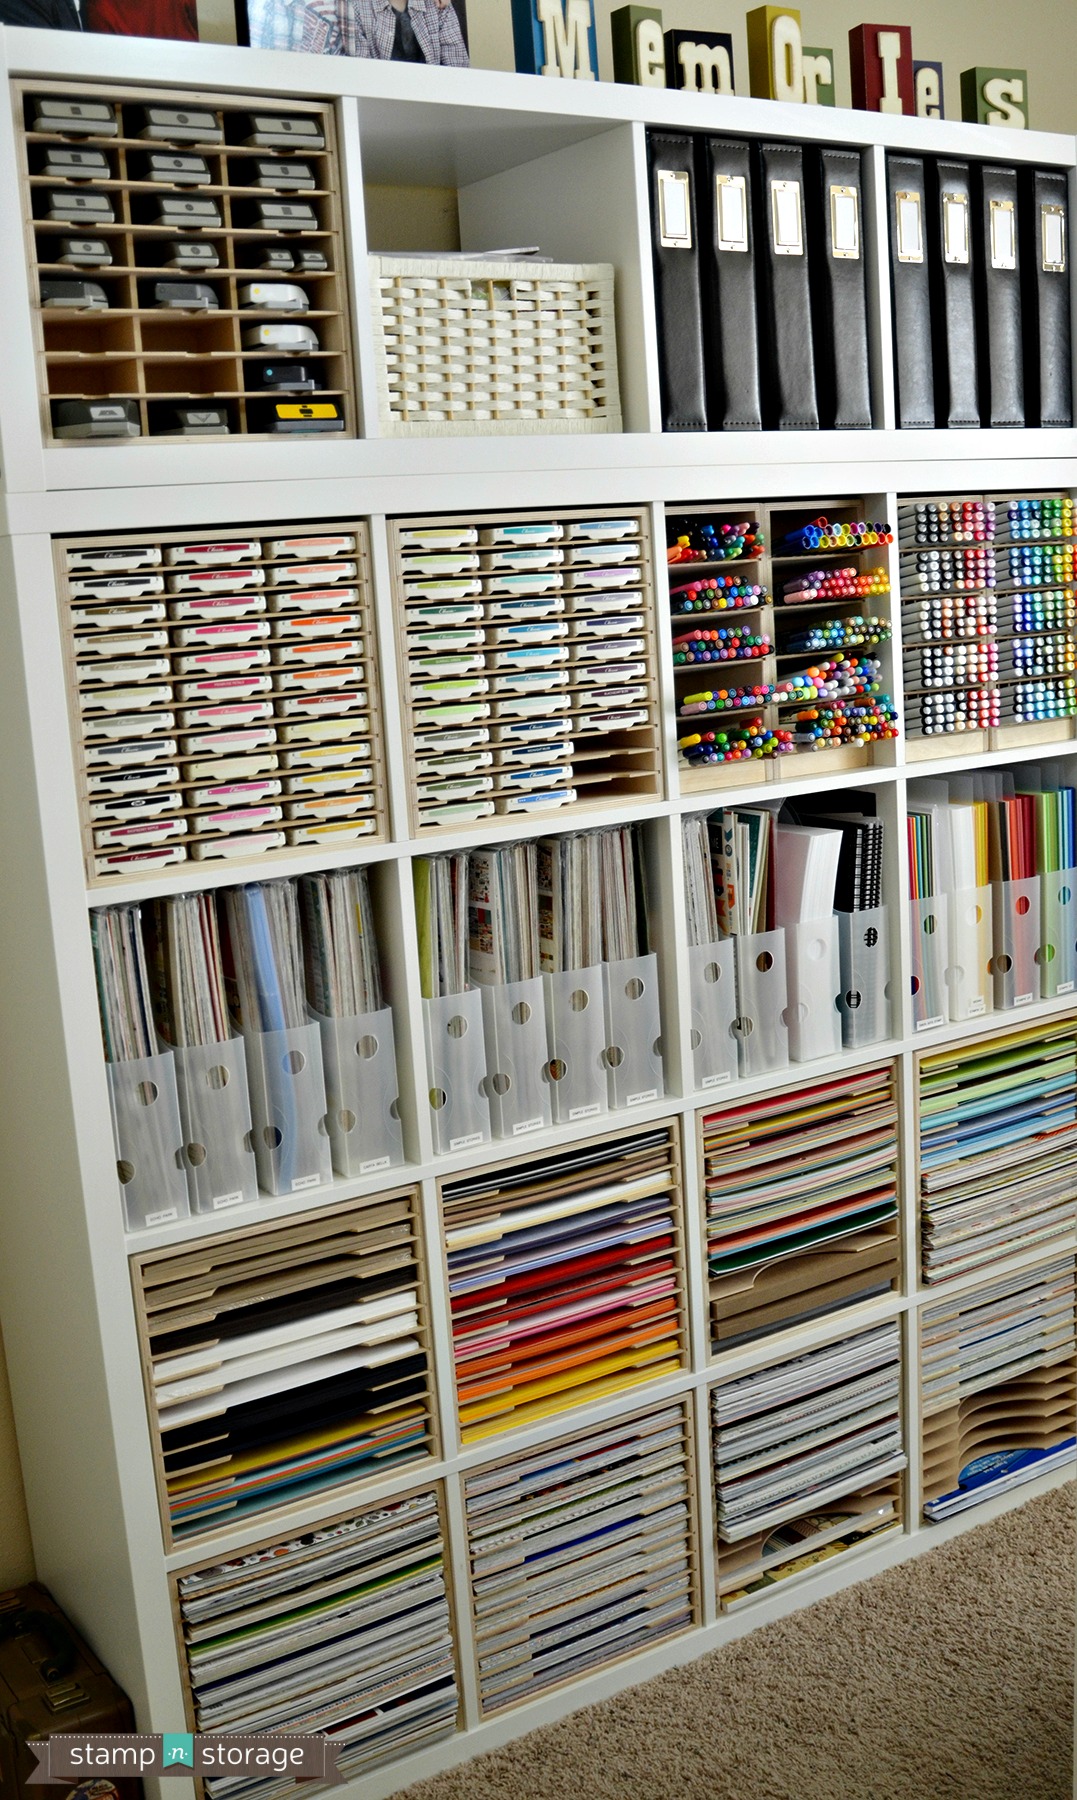 Organize your craft room with Stamp-n-Storage products